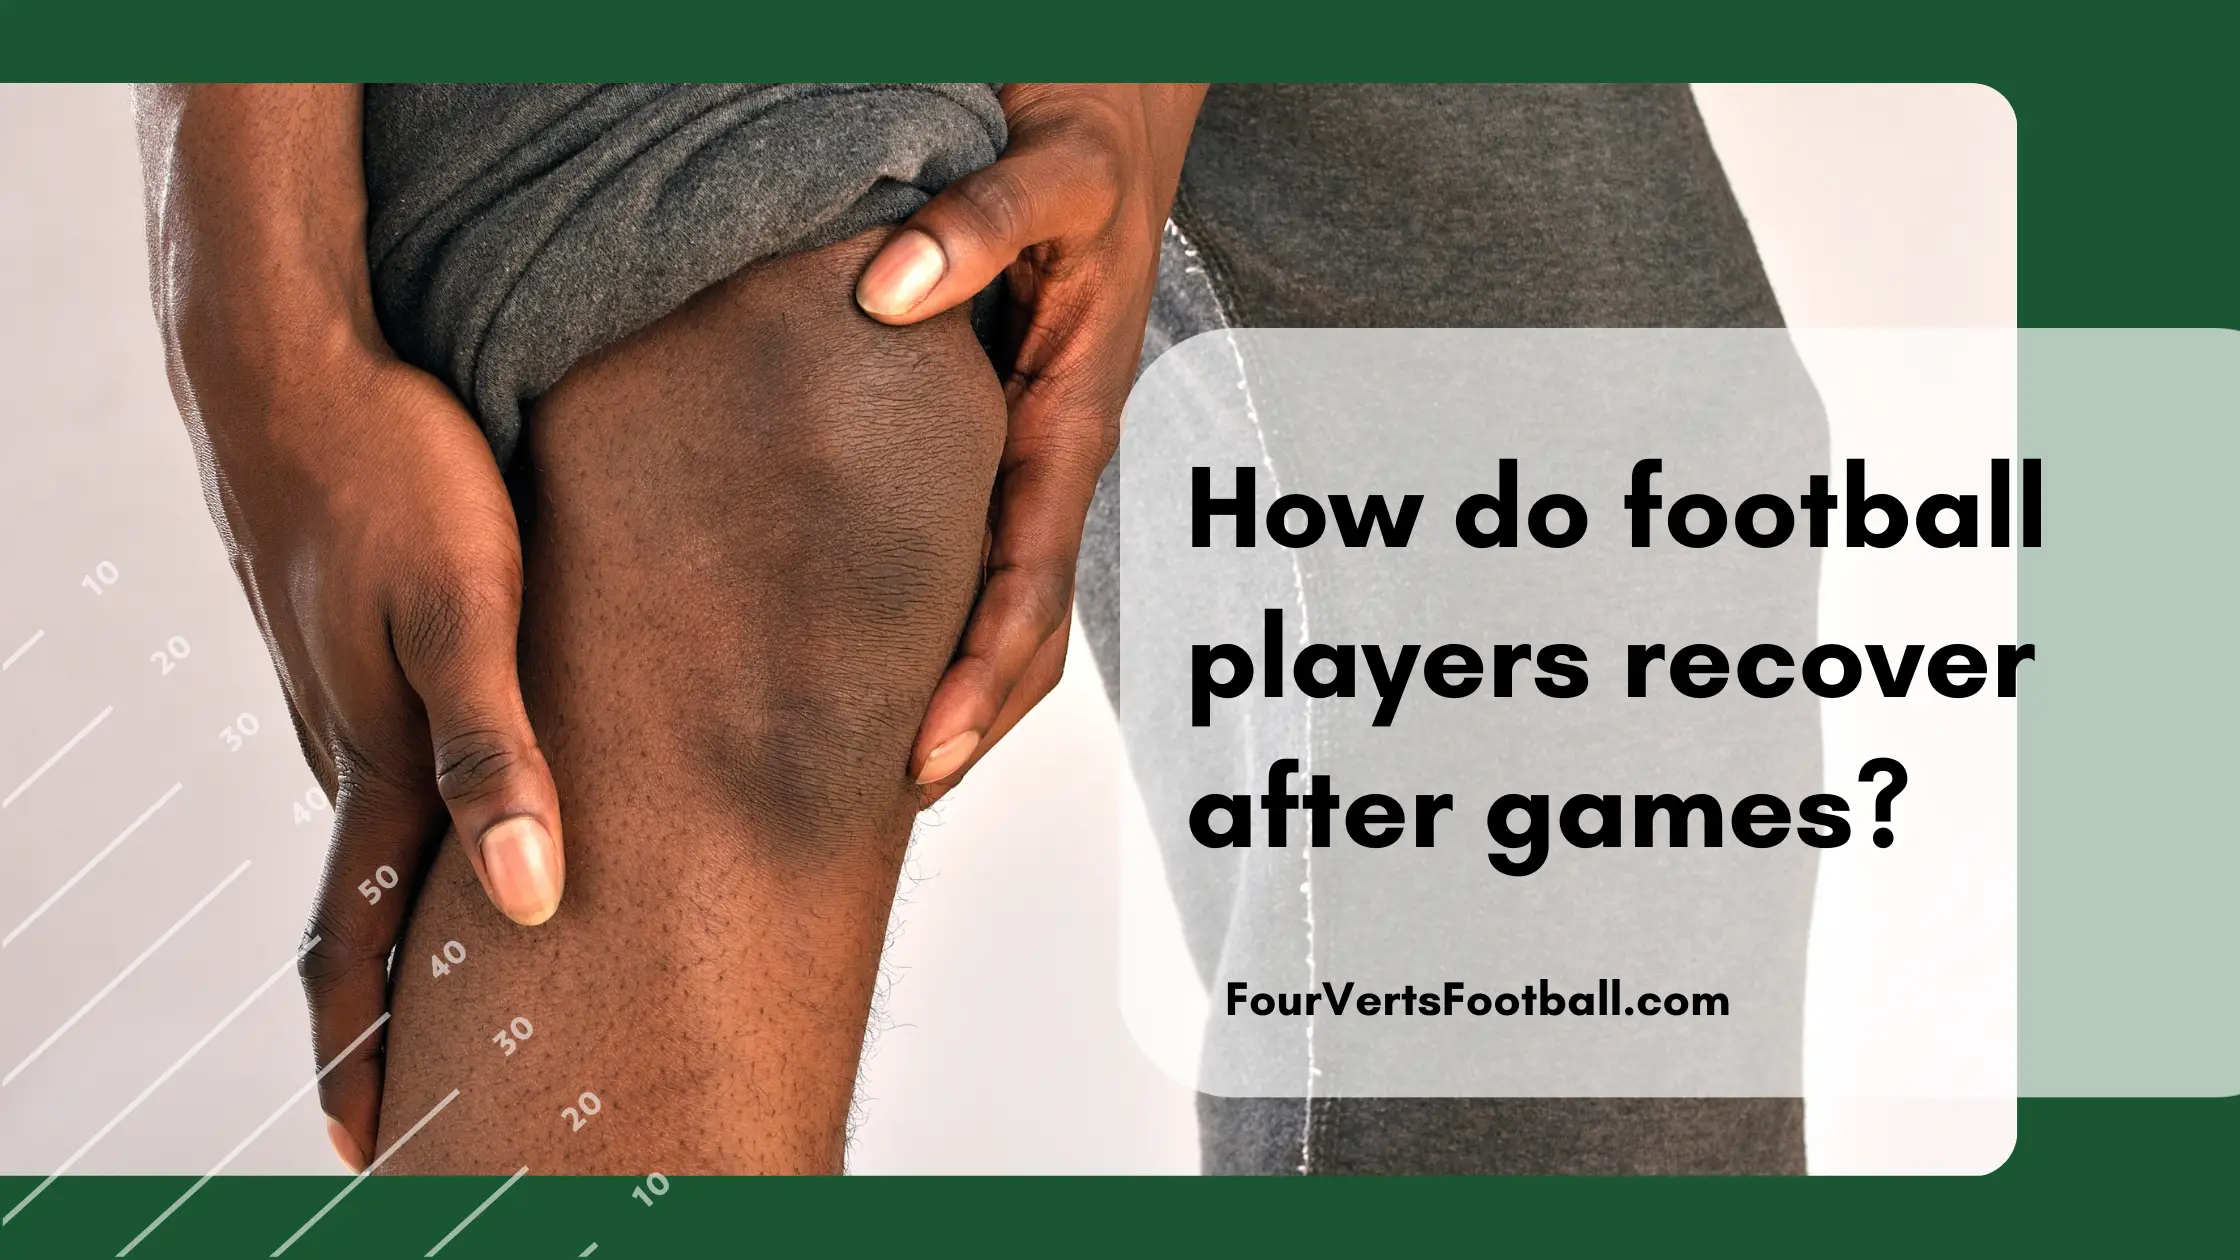 How do football players recover after games?